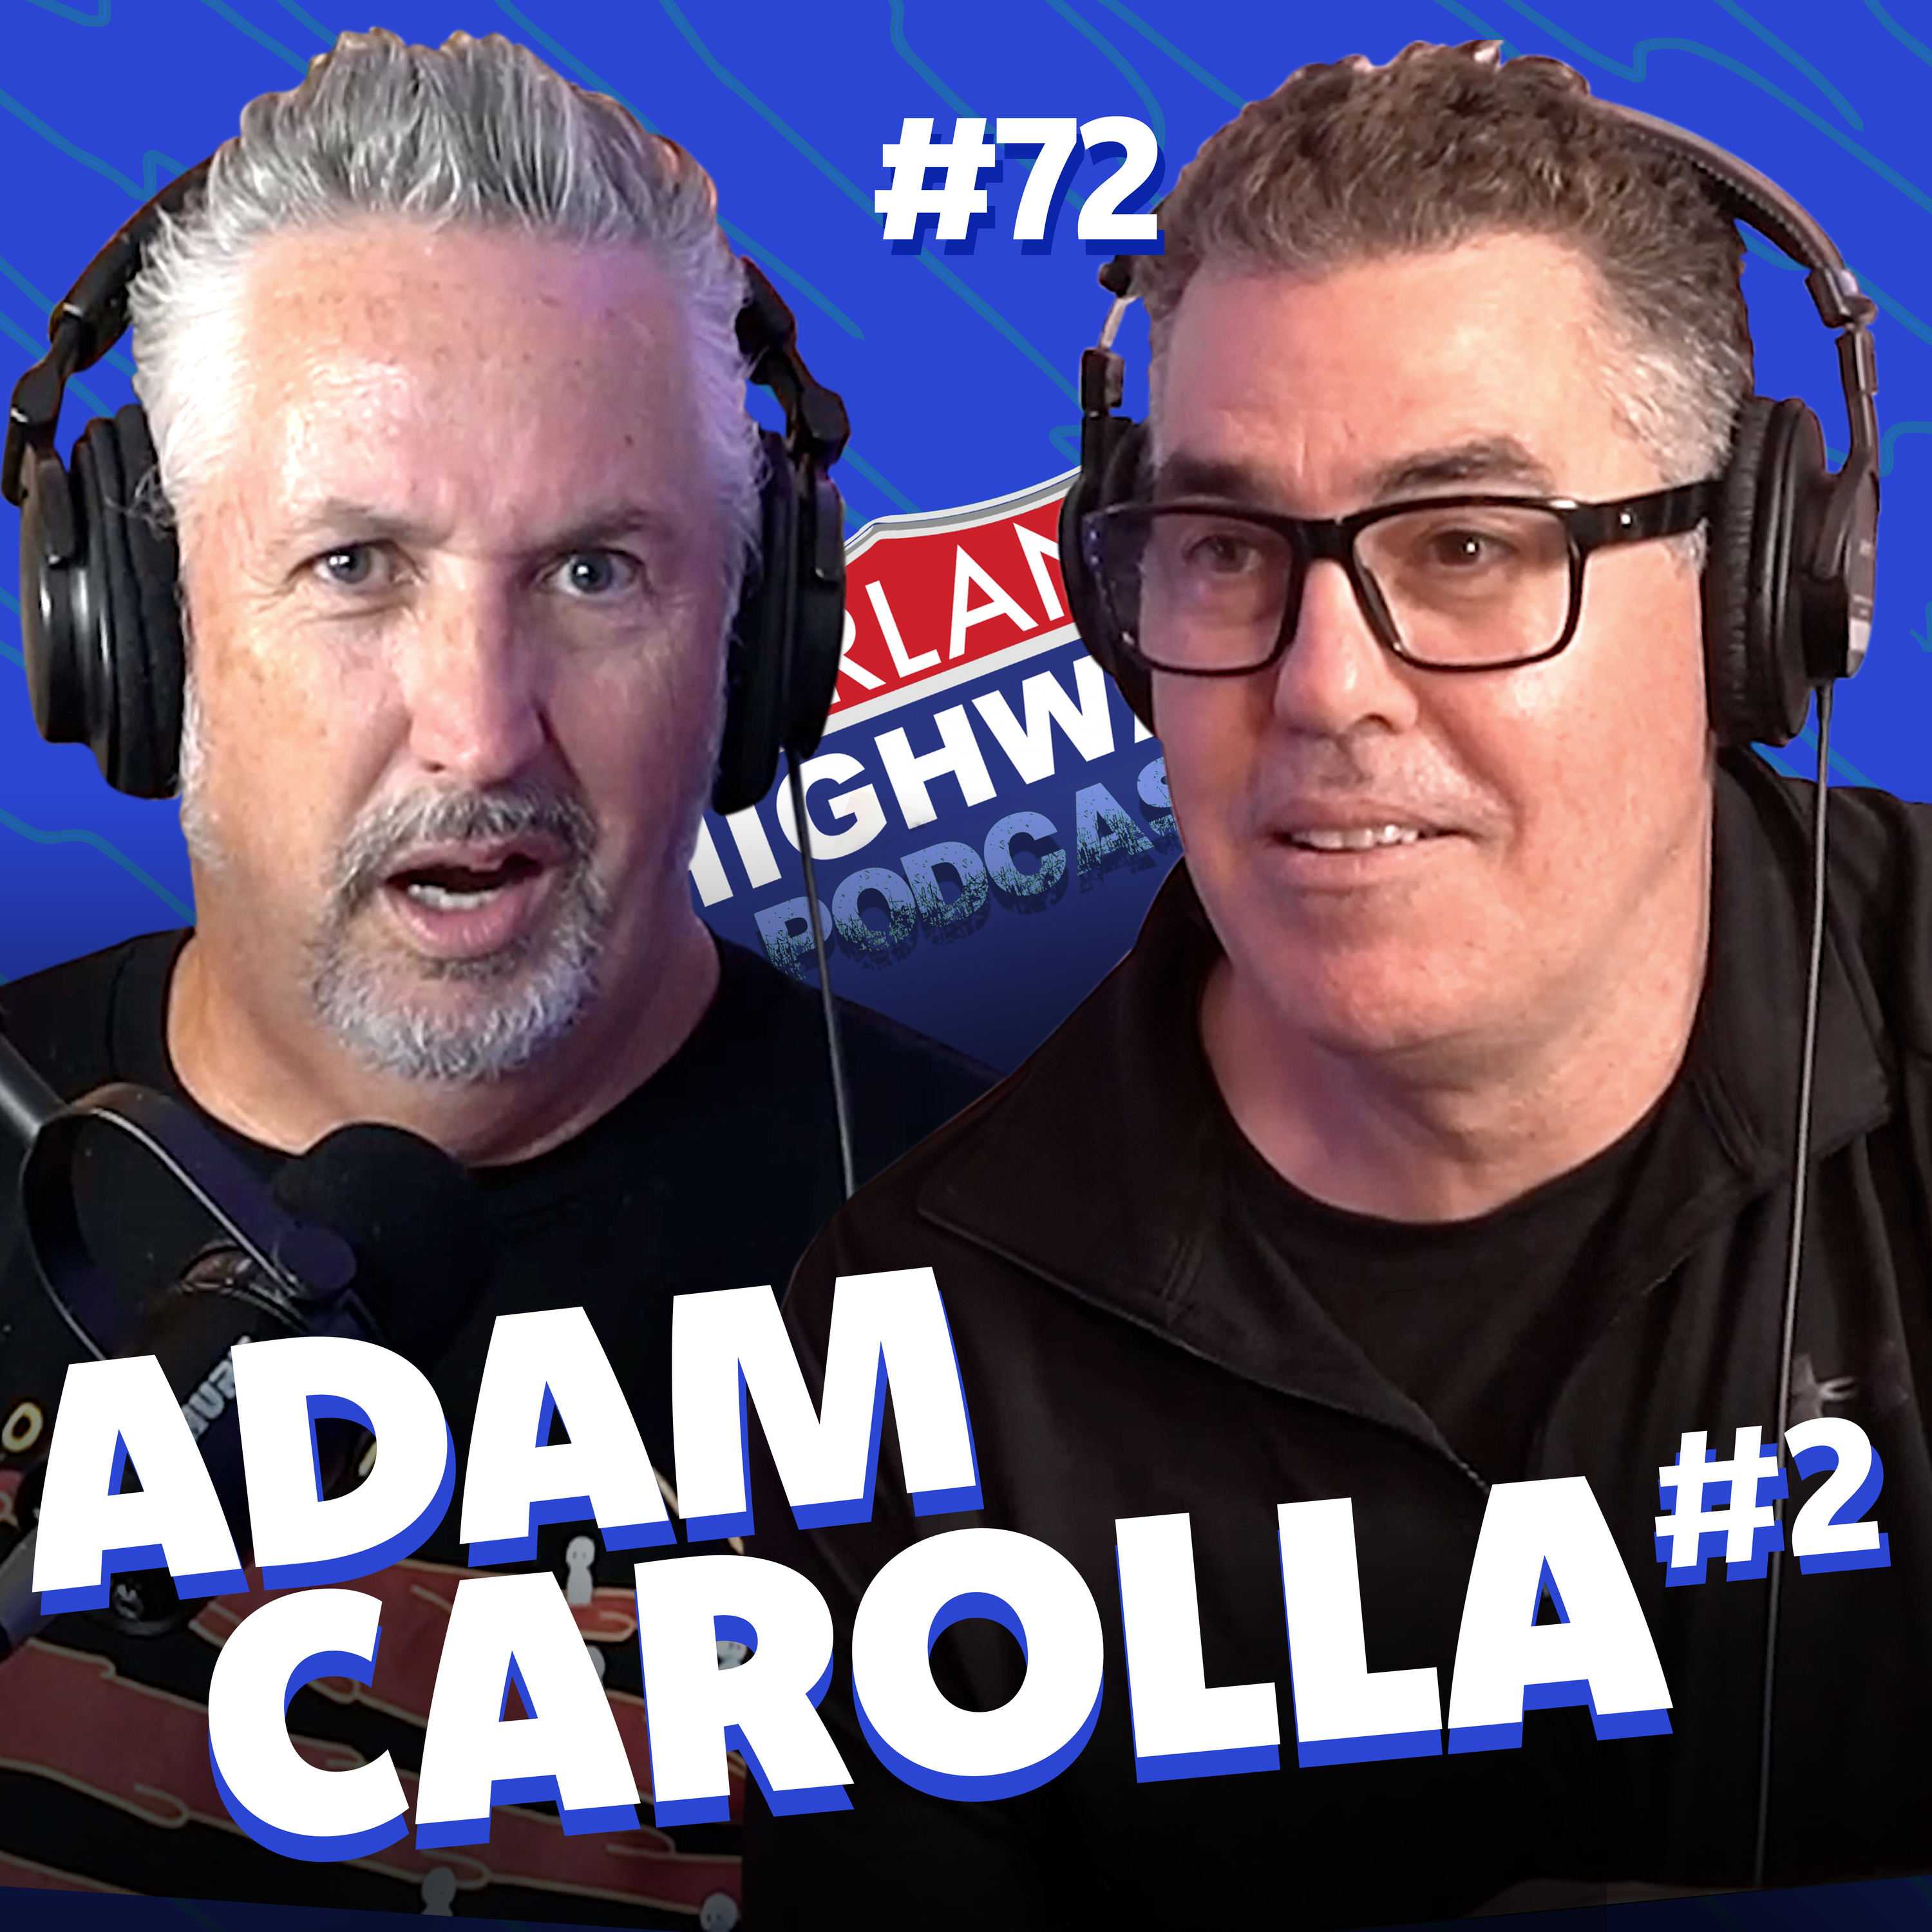 NEW HARLAND HIGHWAY #72 - ADAM CAROLLA - Actor, Podcaster, comedian, writer, producer, on shoplifting, ants, knock knock jokes, and wordsmithing